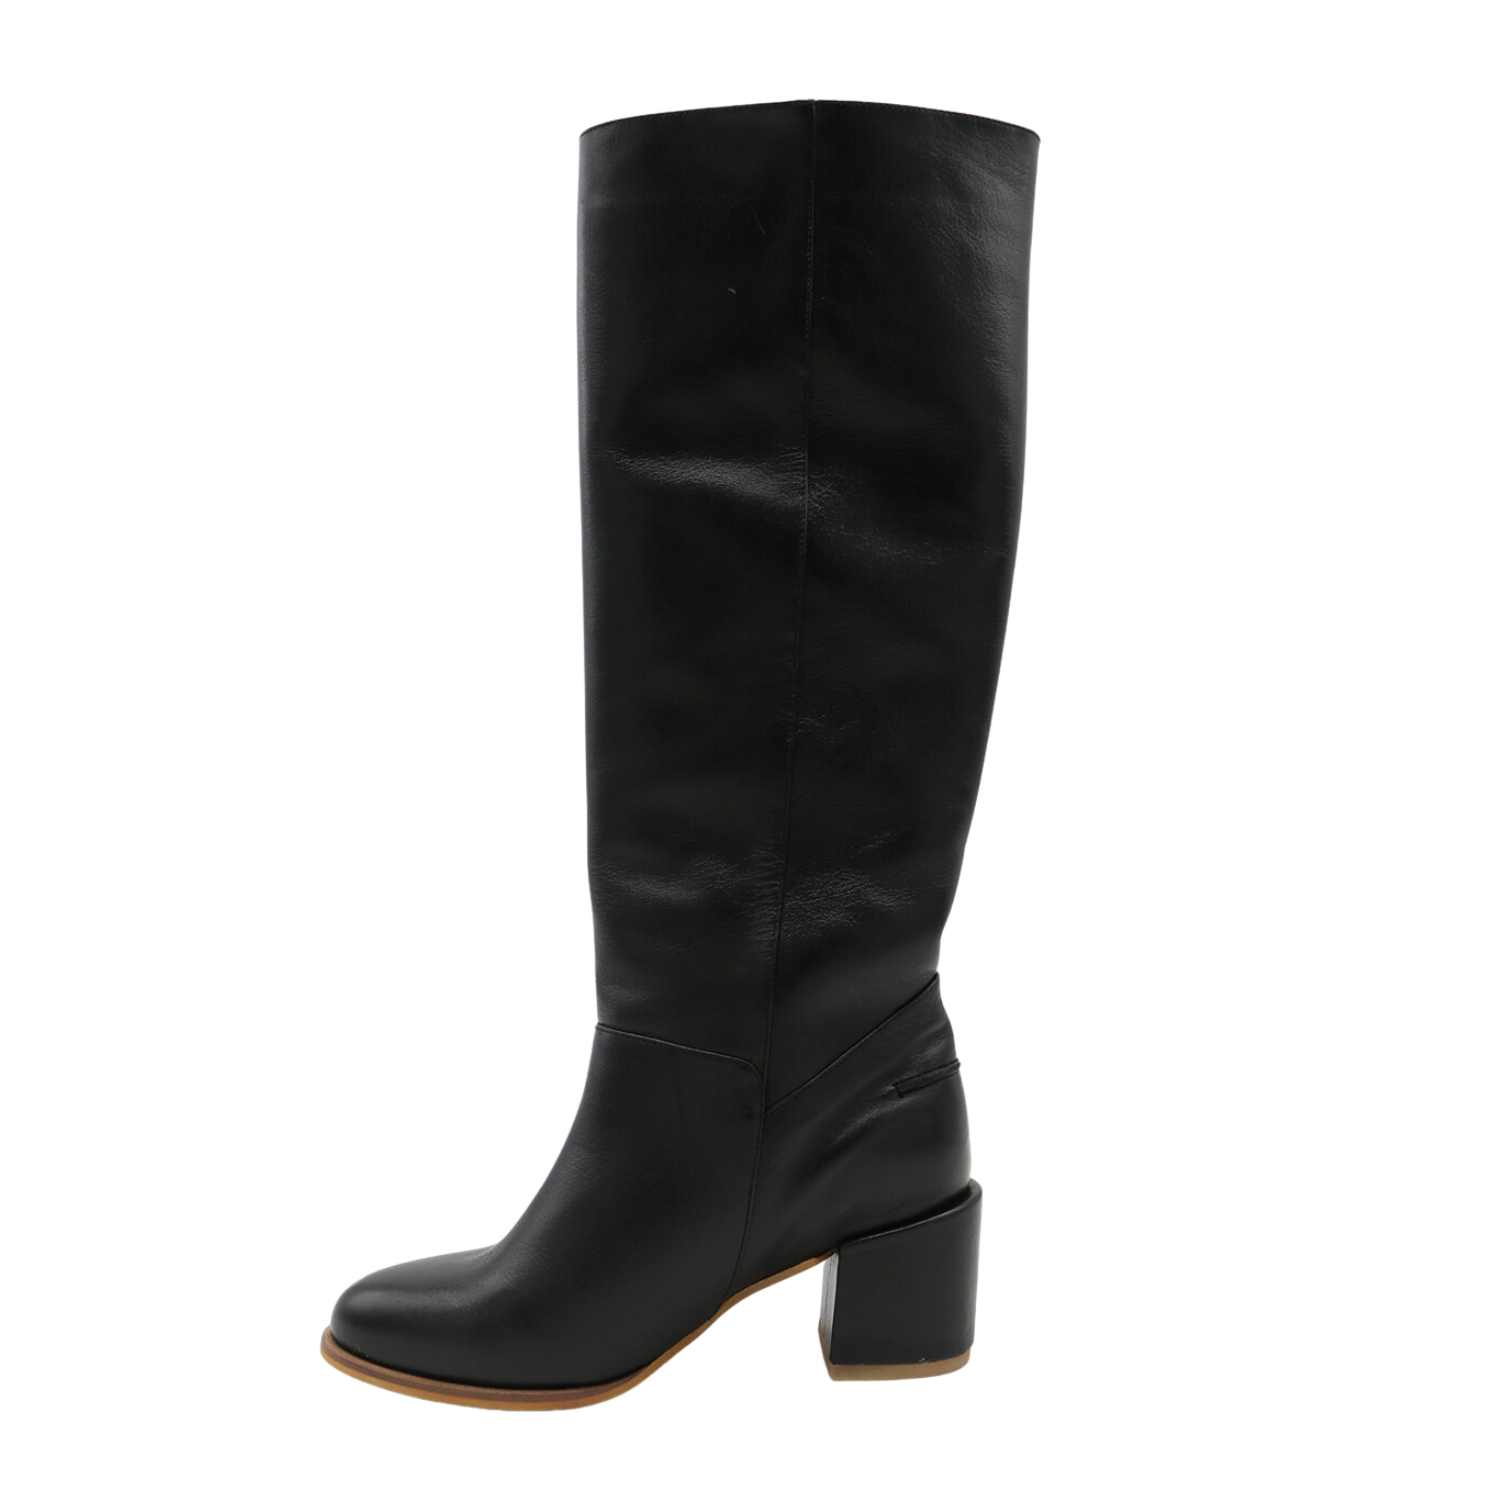 Women’s ClÃ©o Knee High Boots In Black Leather 4 Uk Stivali New York